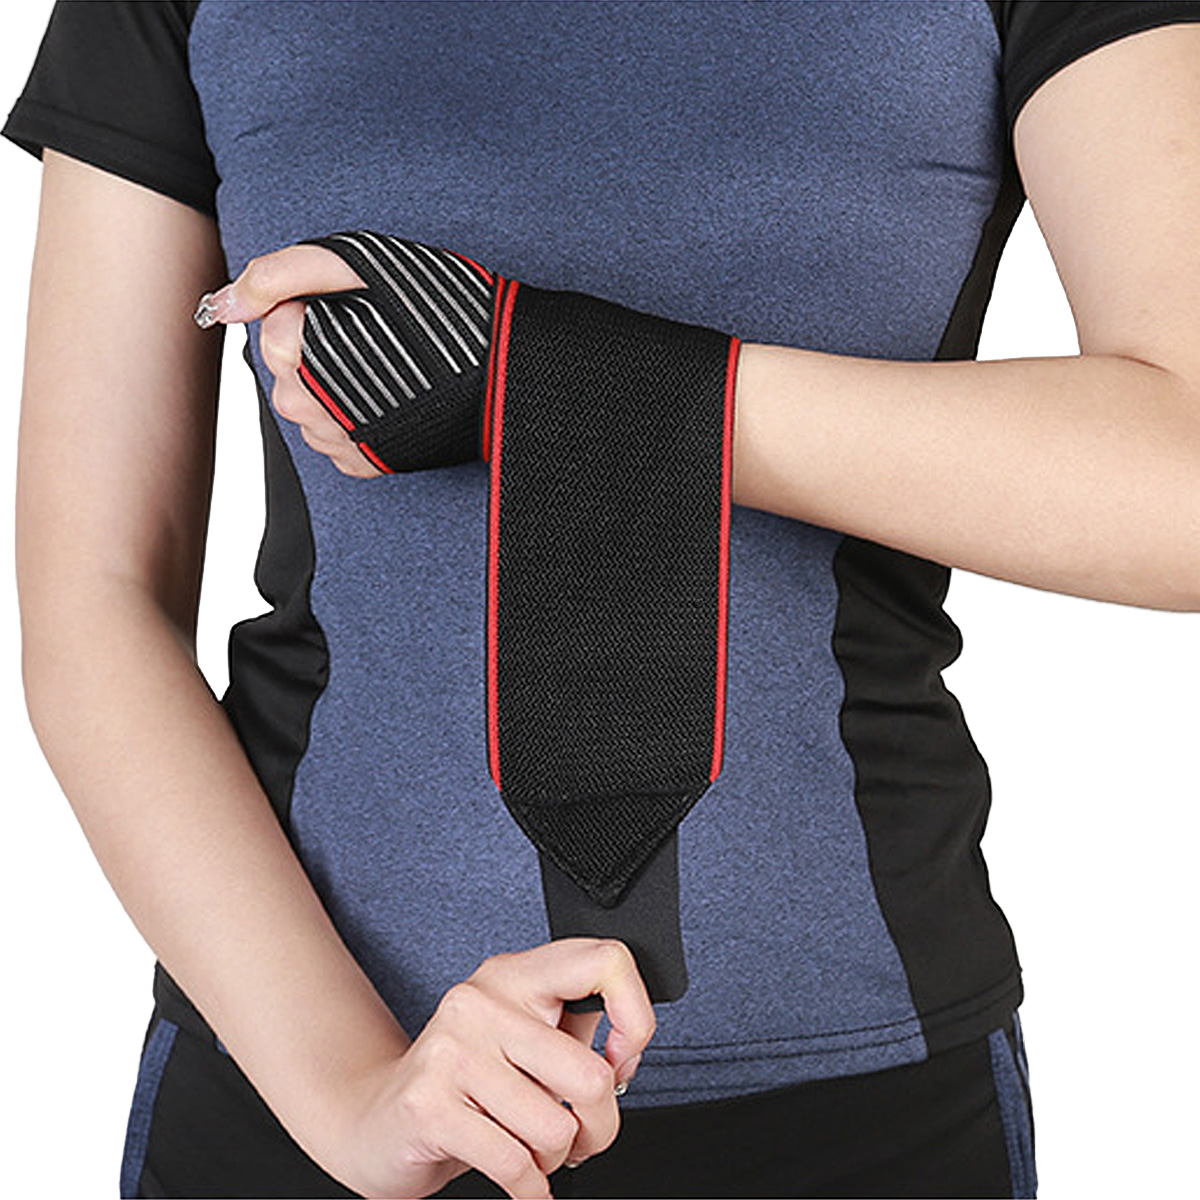 Adjustable Exercise Protection Wrist Support Strap